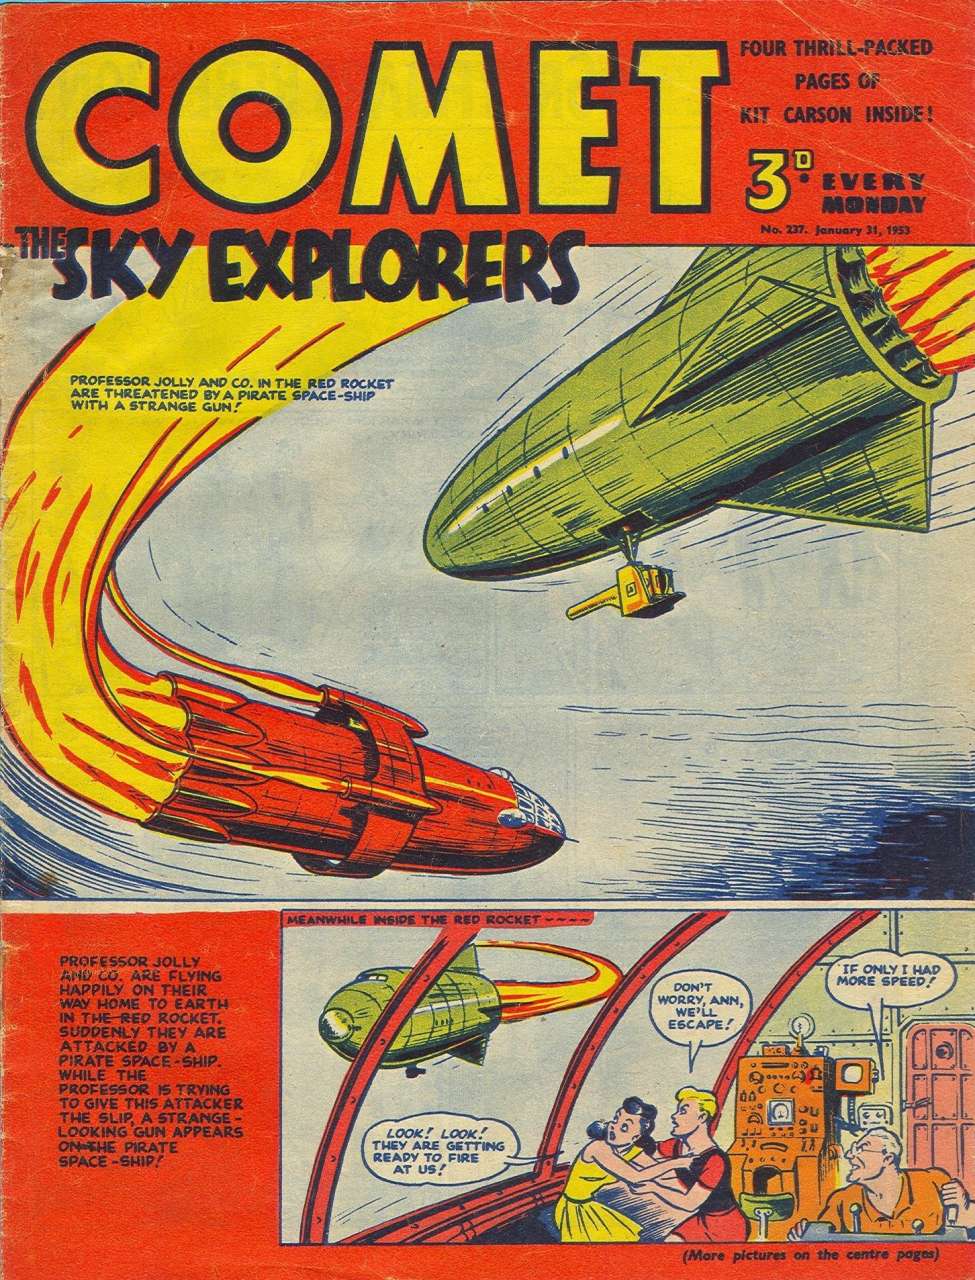 Book Cover For The Comet 237